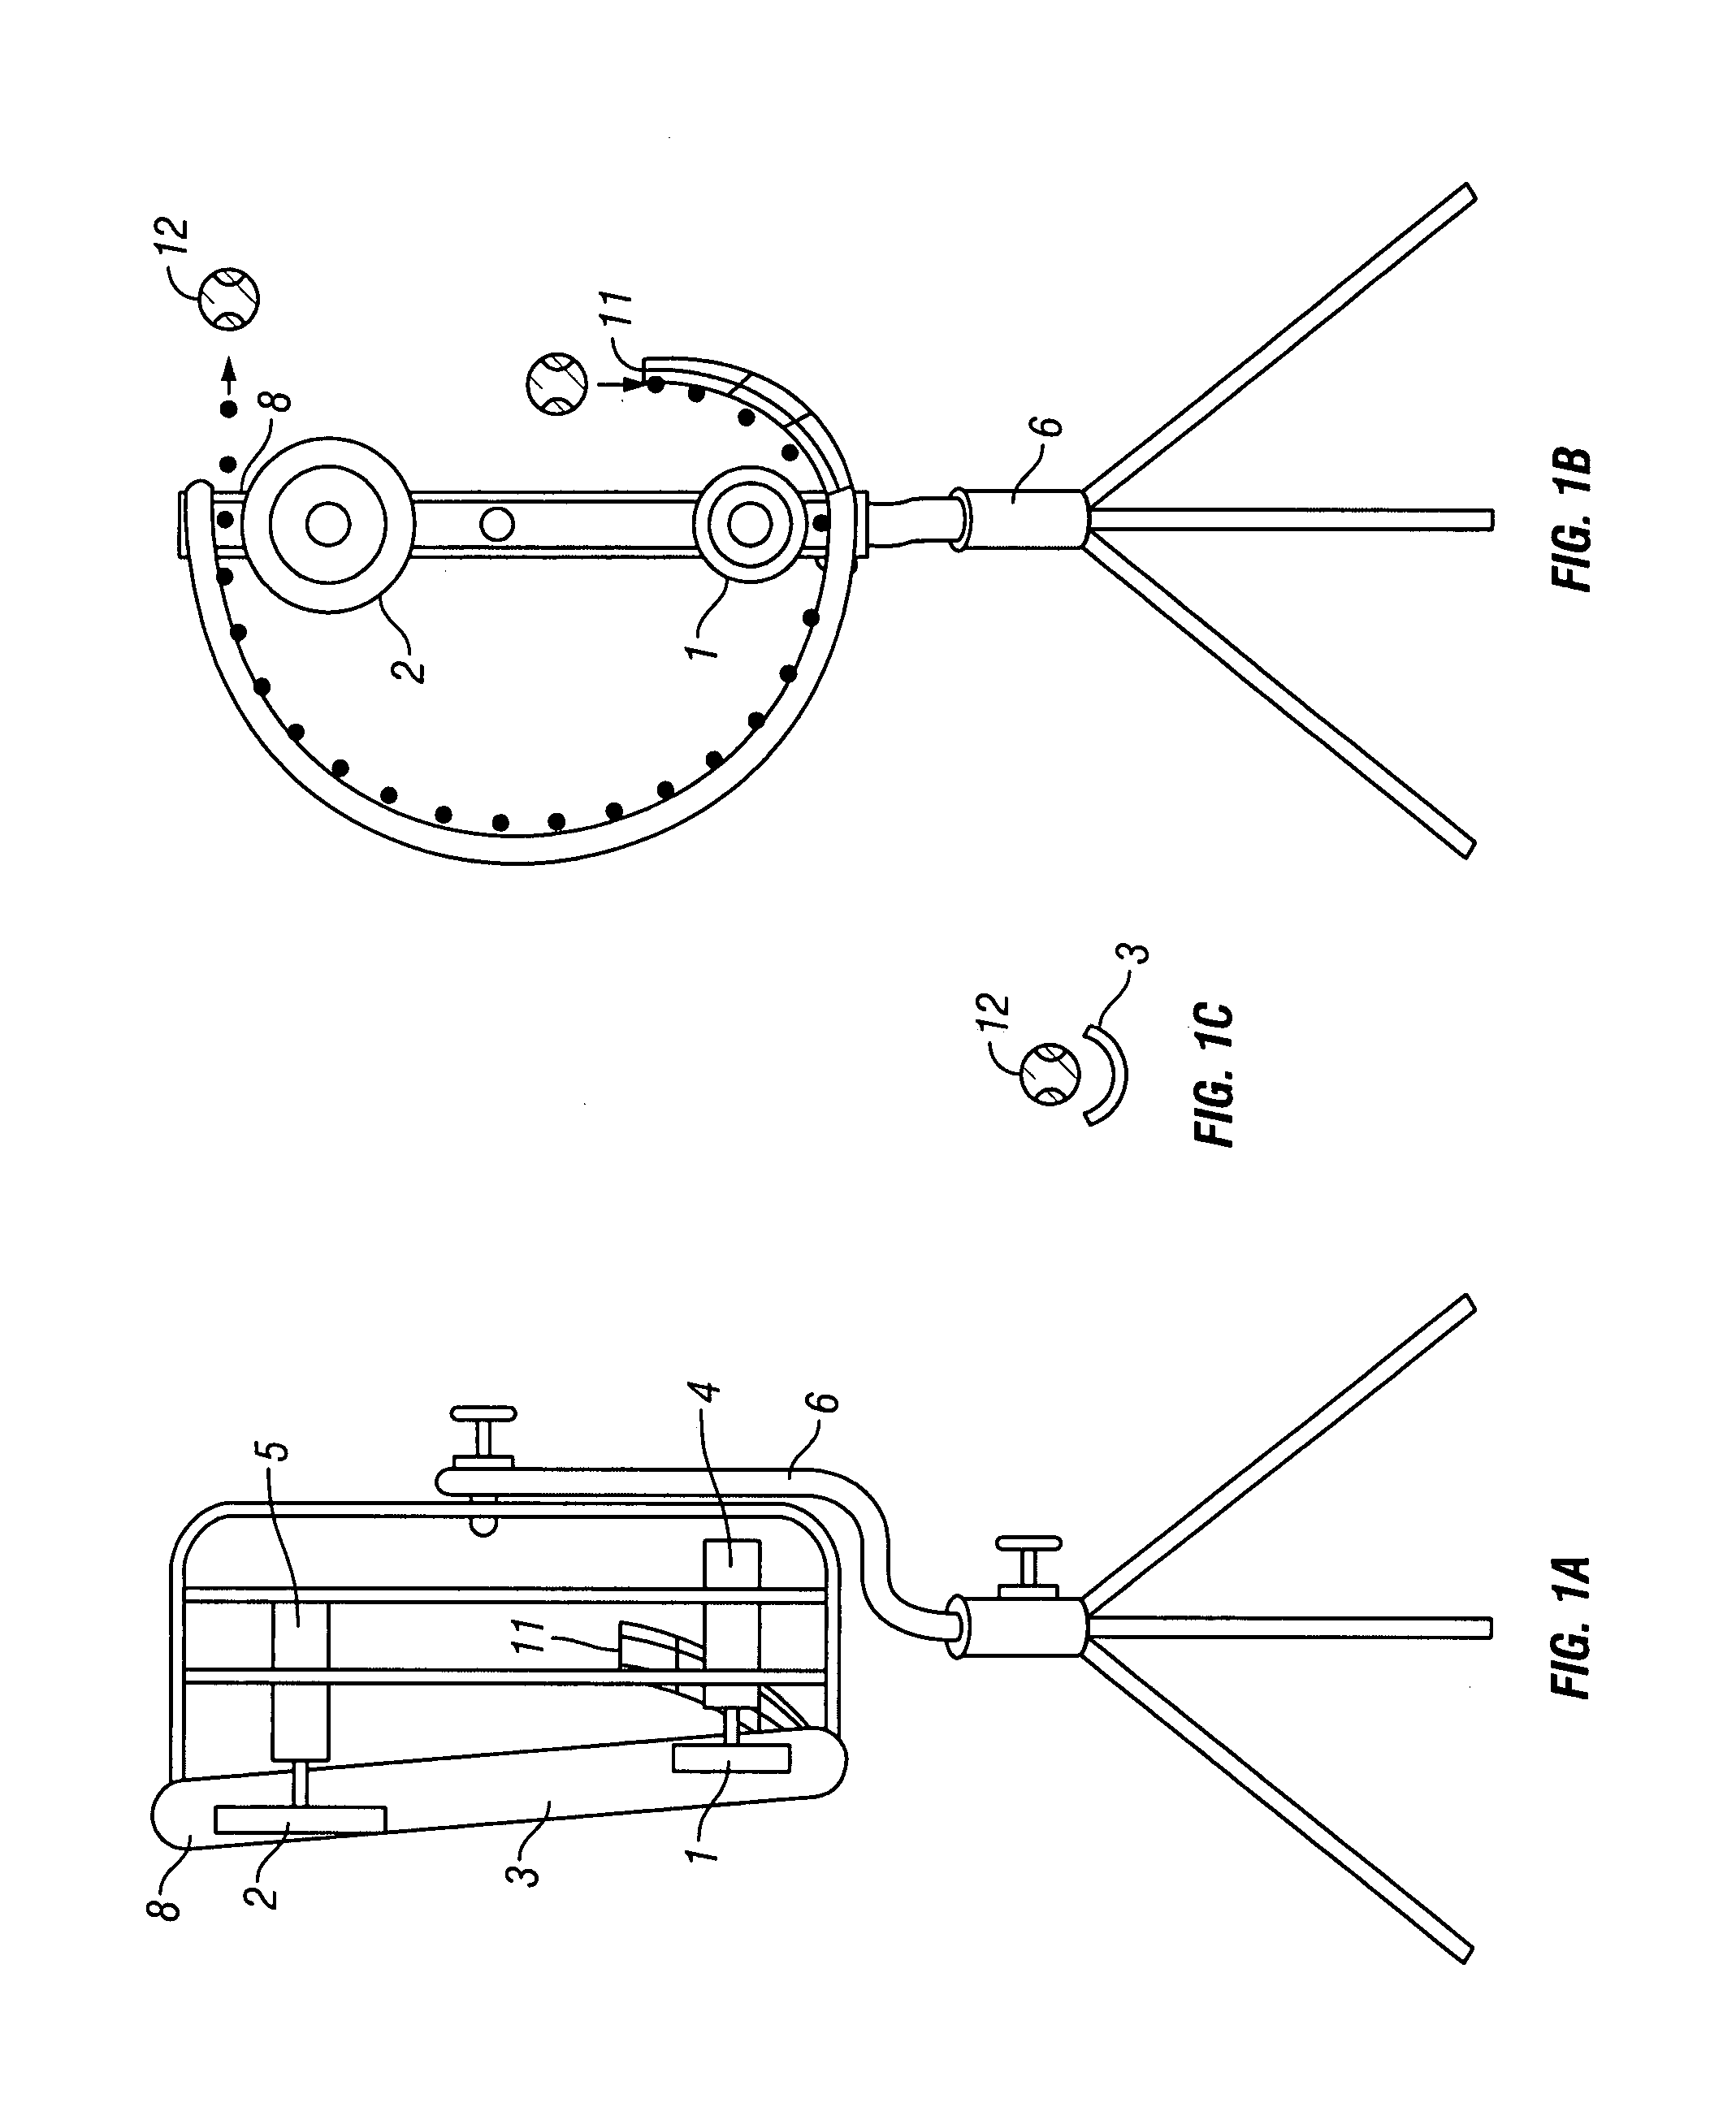 Ball throwing and pitching machine feeder device